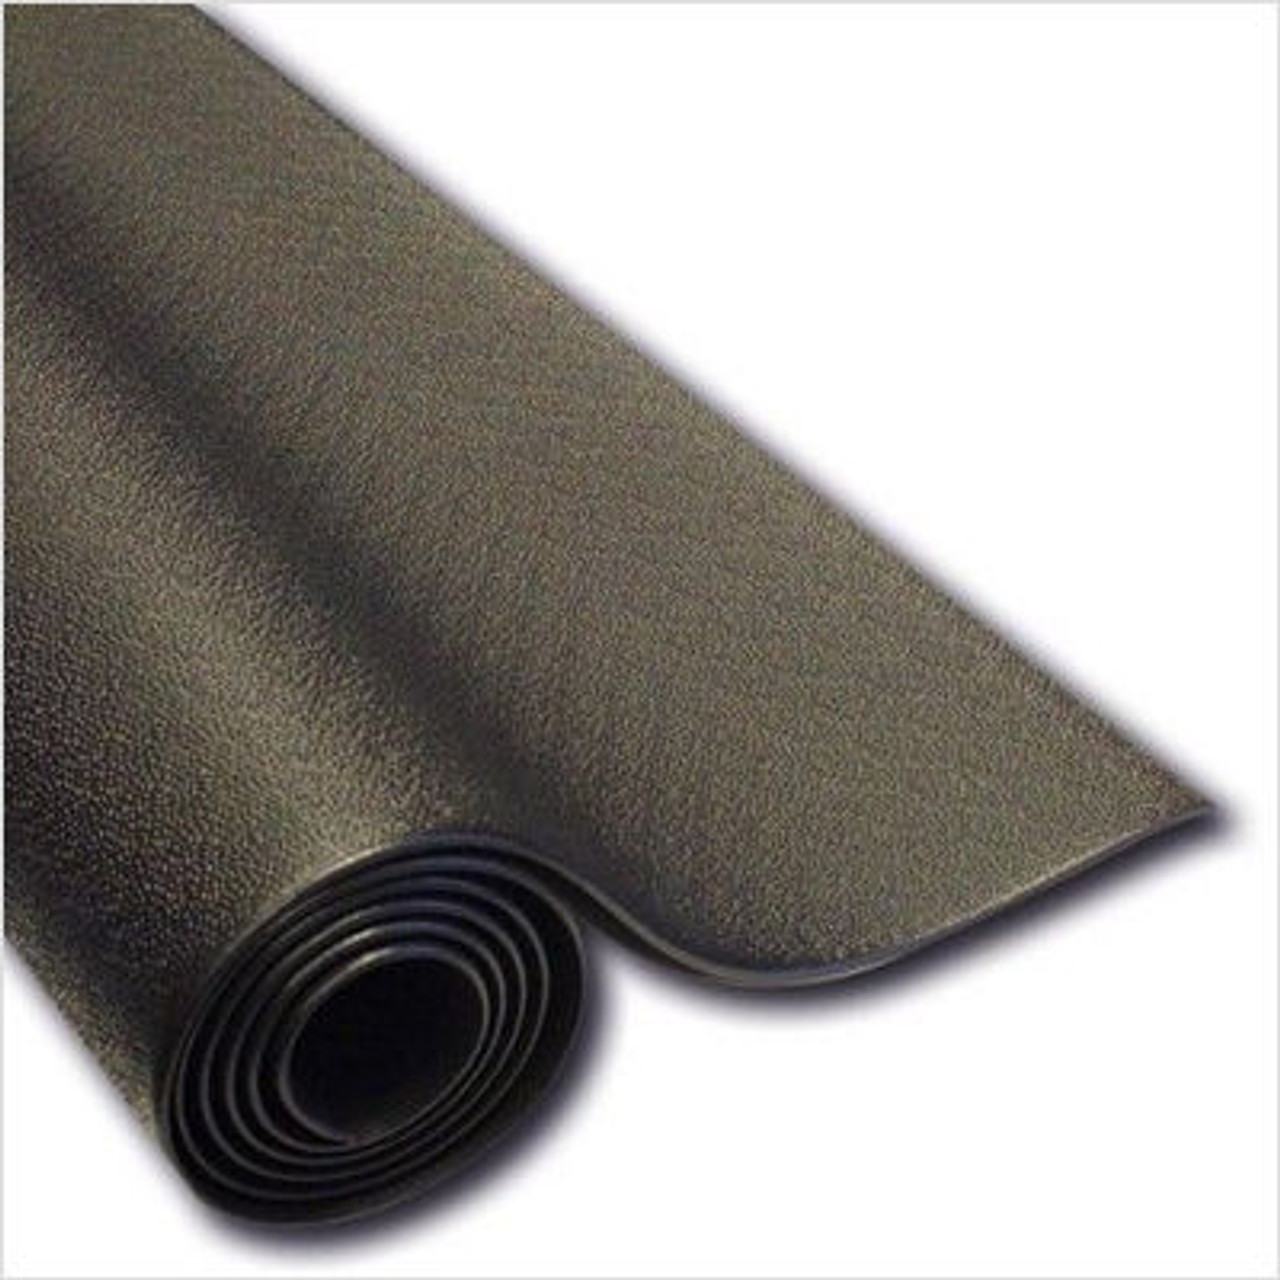 Body Solid SuperMat - Protective Rubber Flooring